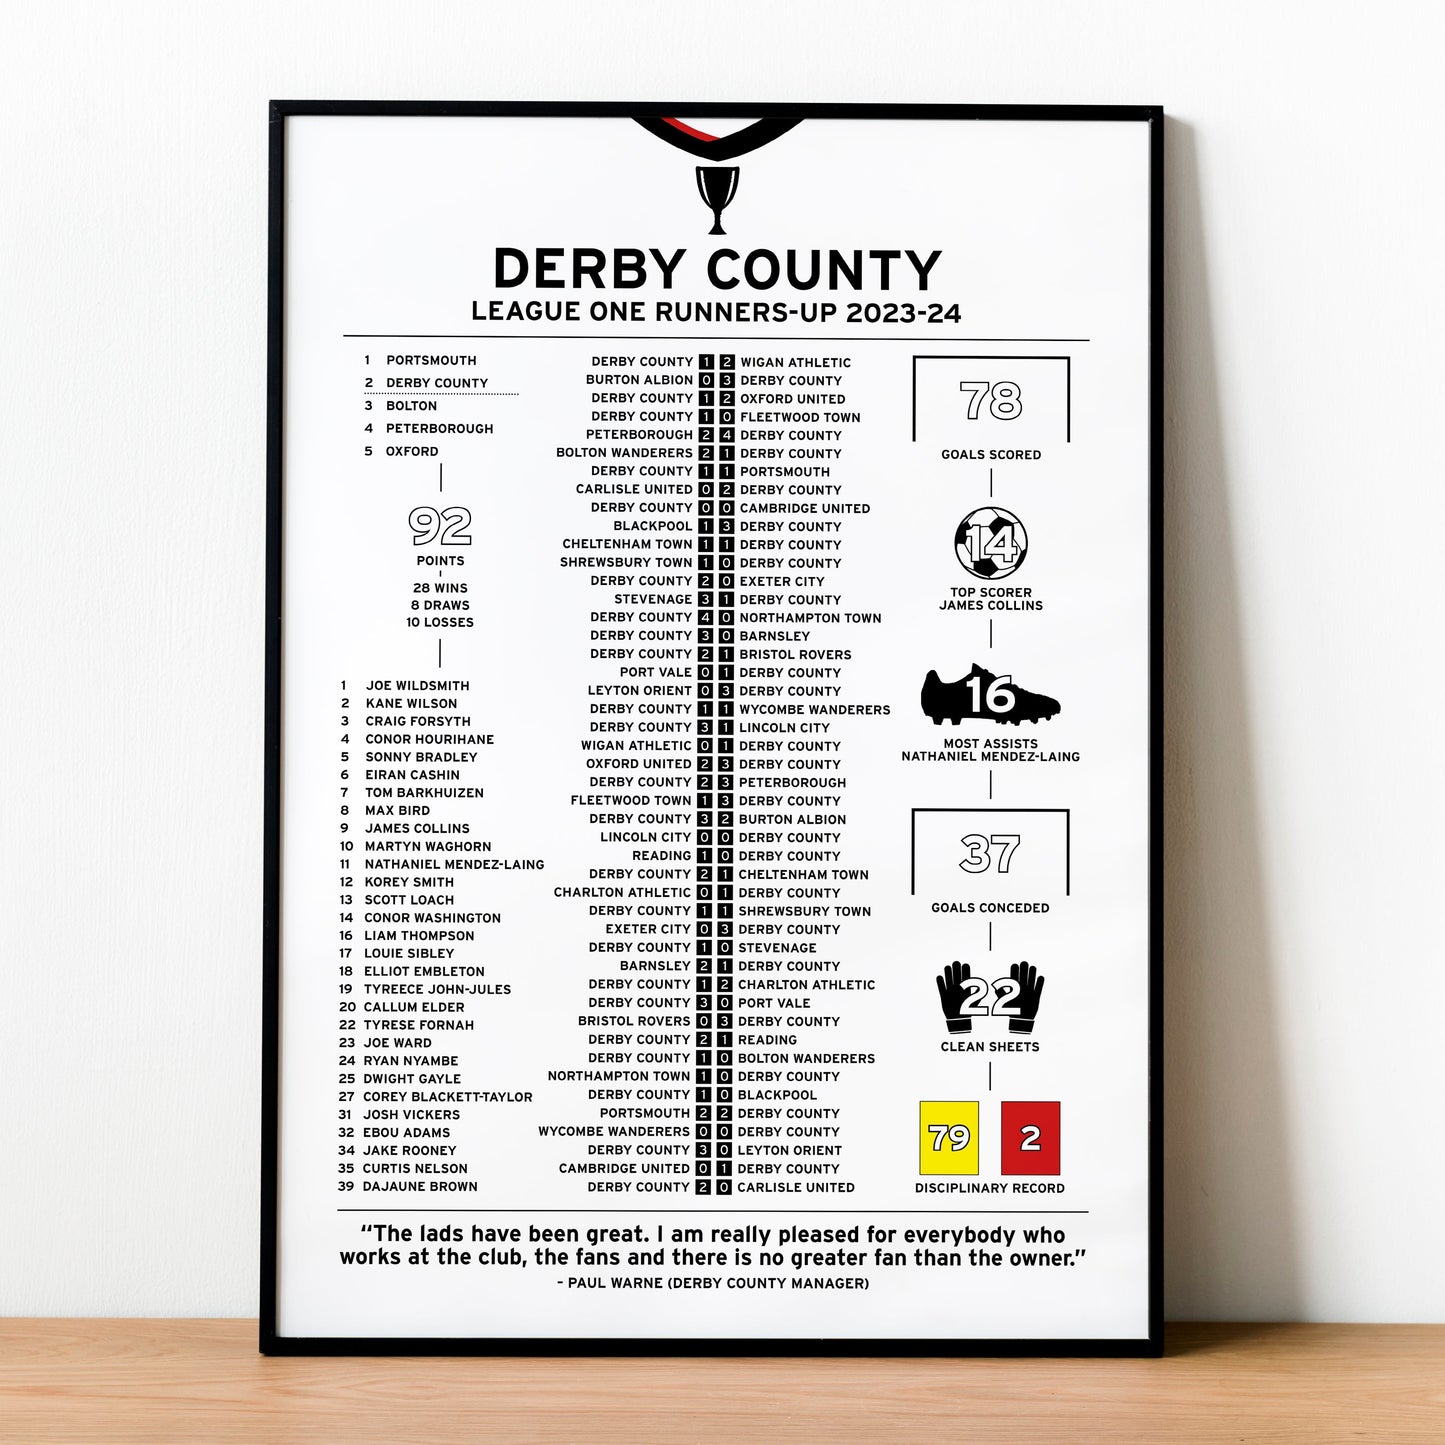 Derby County 2023-24 League One Runners-Up Poster